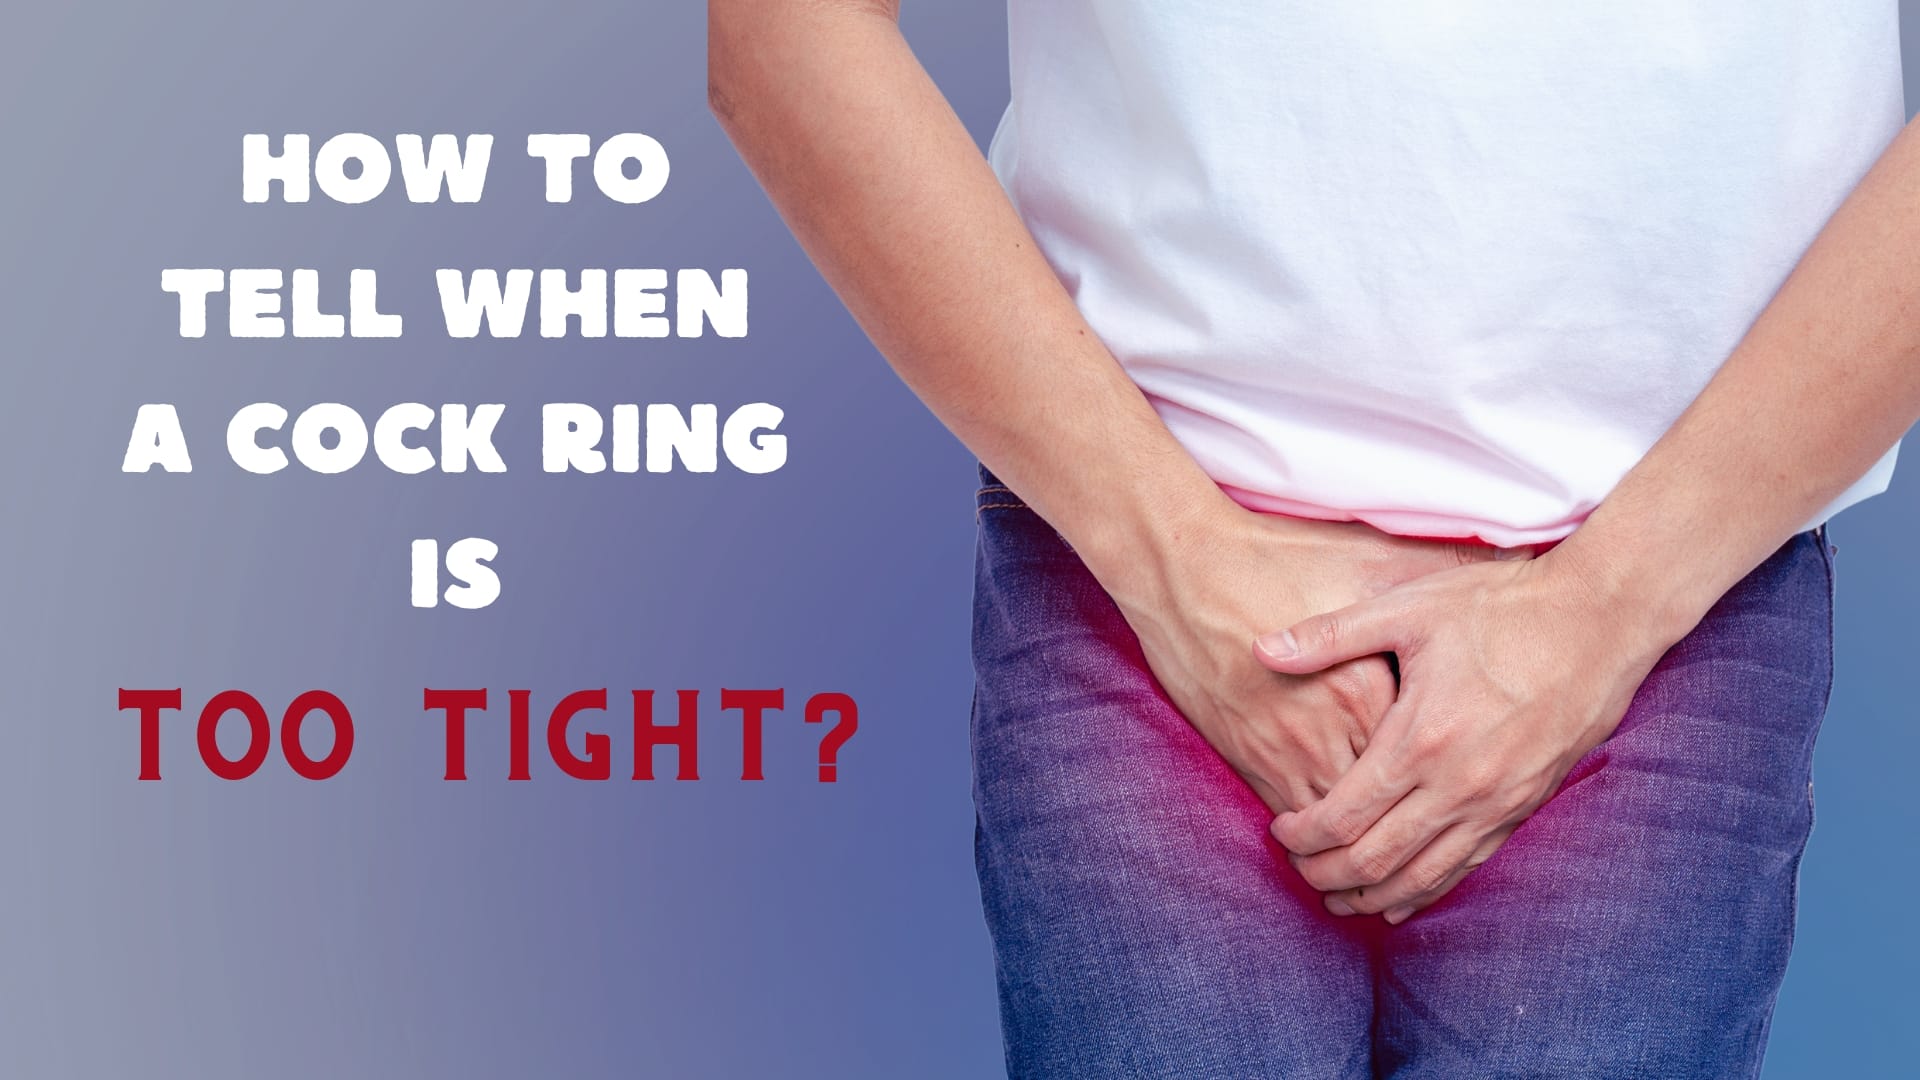 When Do You Know a Cock Ring Is Too Tight?